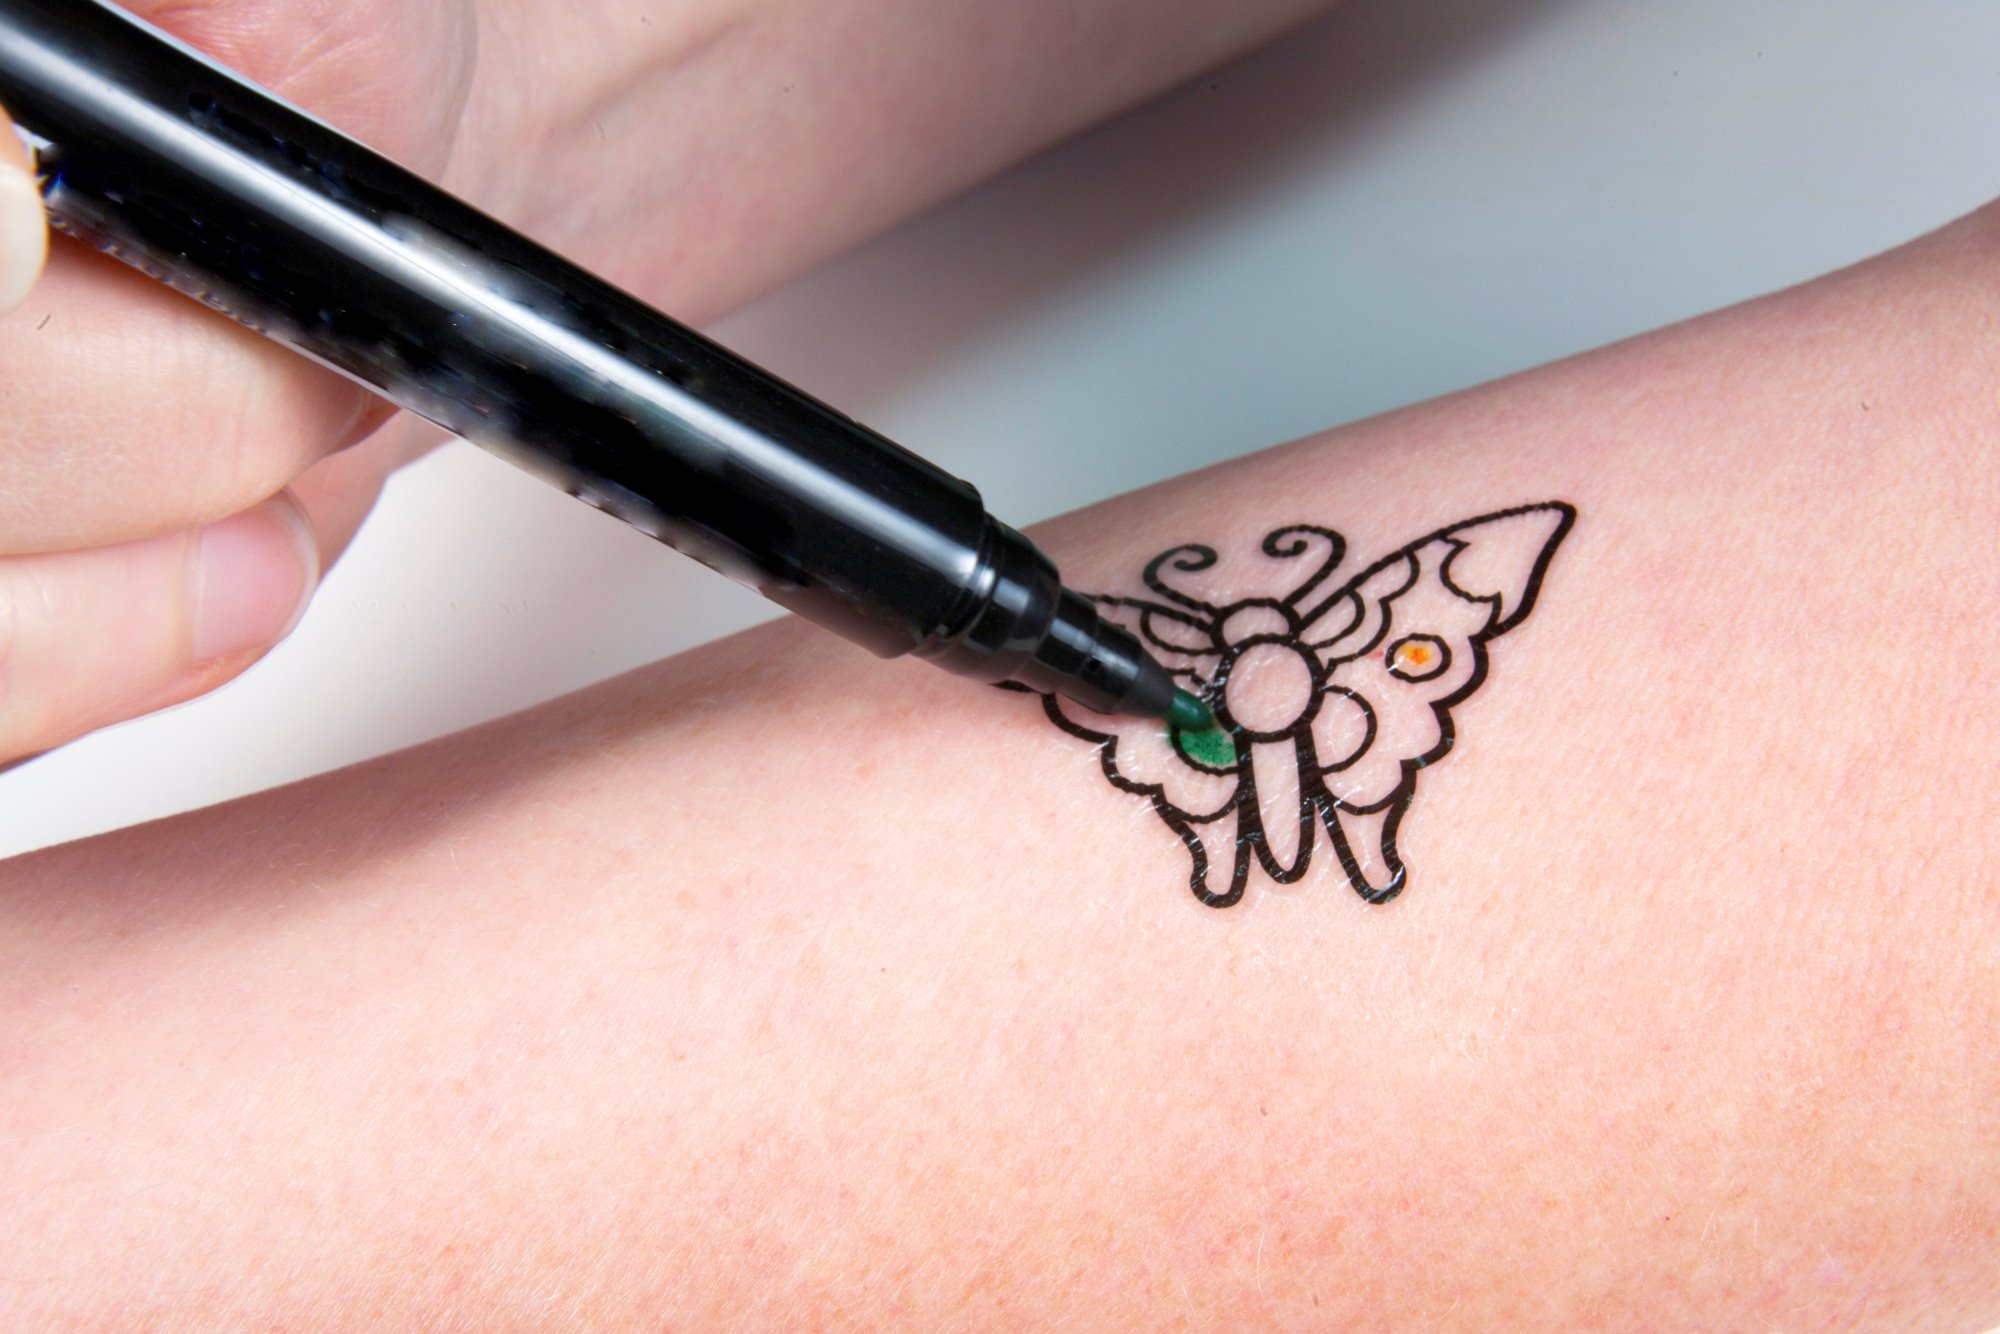 10 Cool Pen And Marker Drawings For Your Arm/Hand